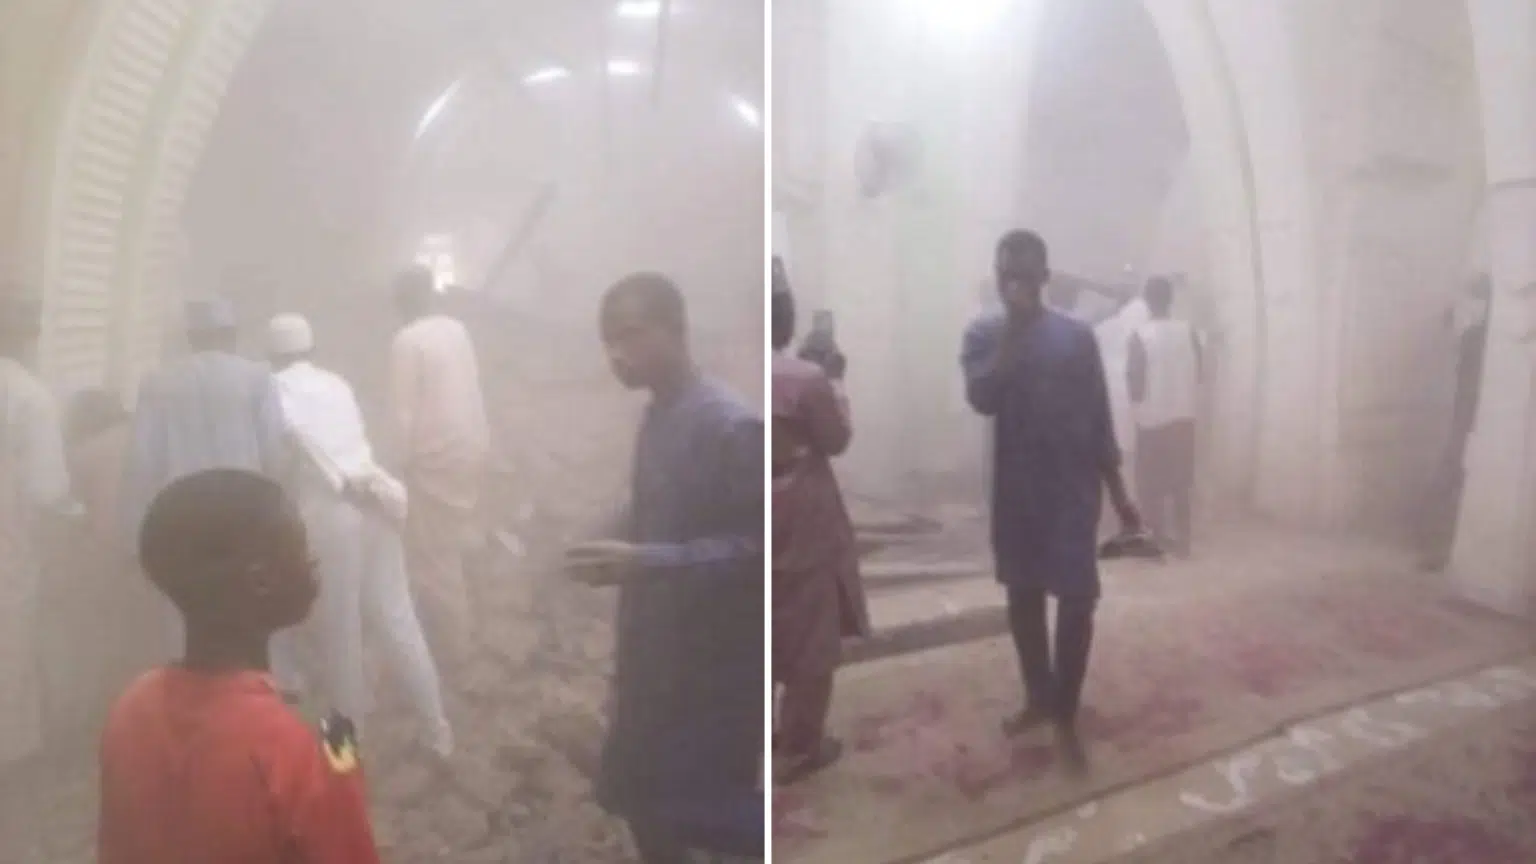 Zaria-Mosque-Collapse-1536x864.png.webp